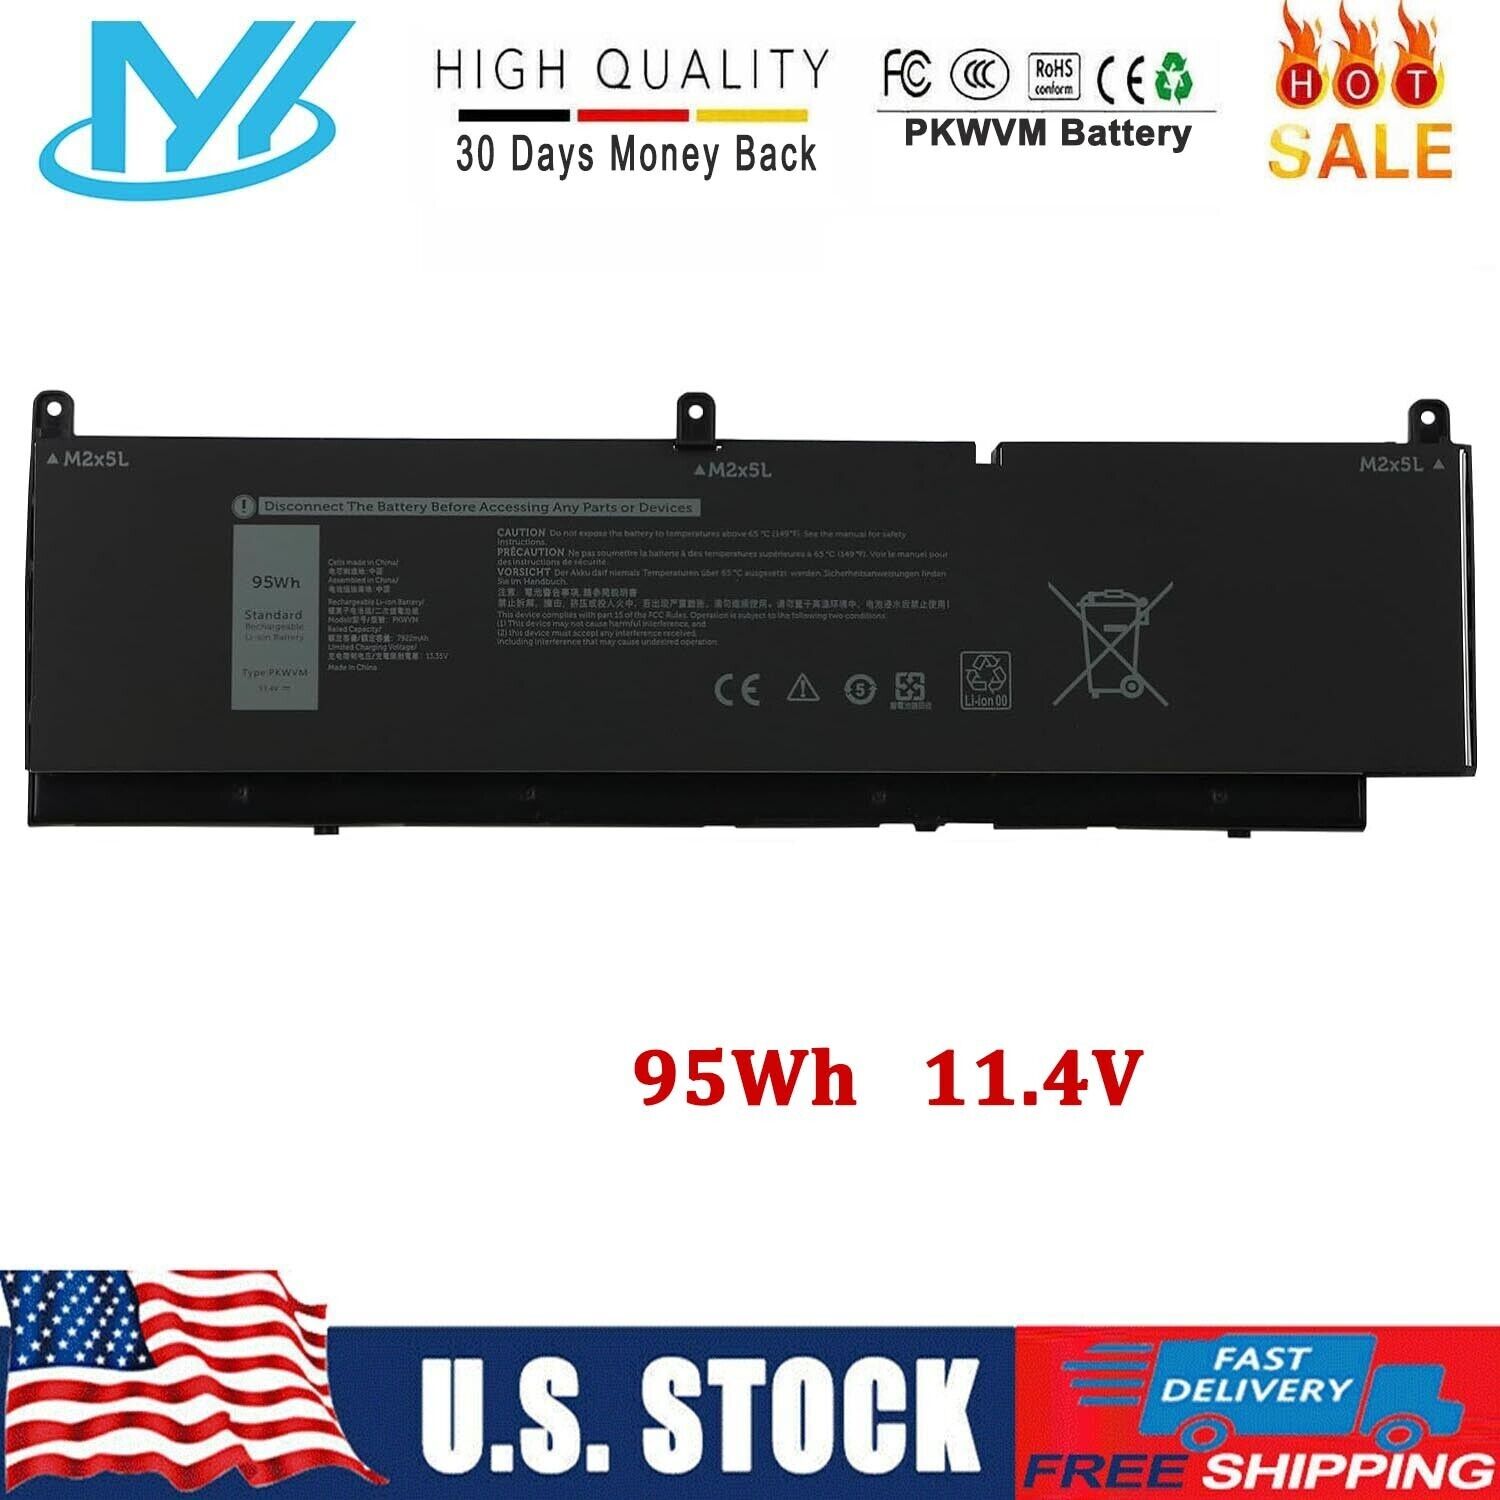 95Wh PKWVM Battery For Dell Precision 7550 7560 7750 7760 0447VR 068N03 453-BBCQ